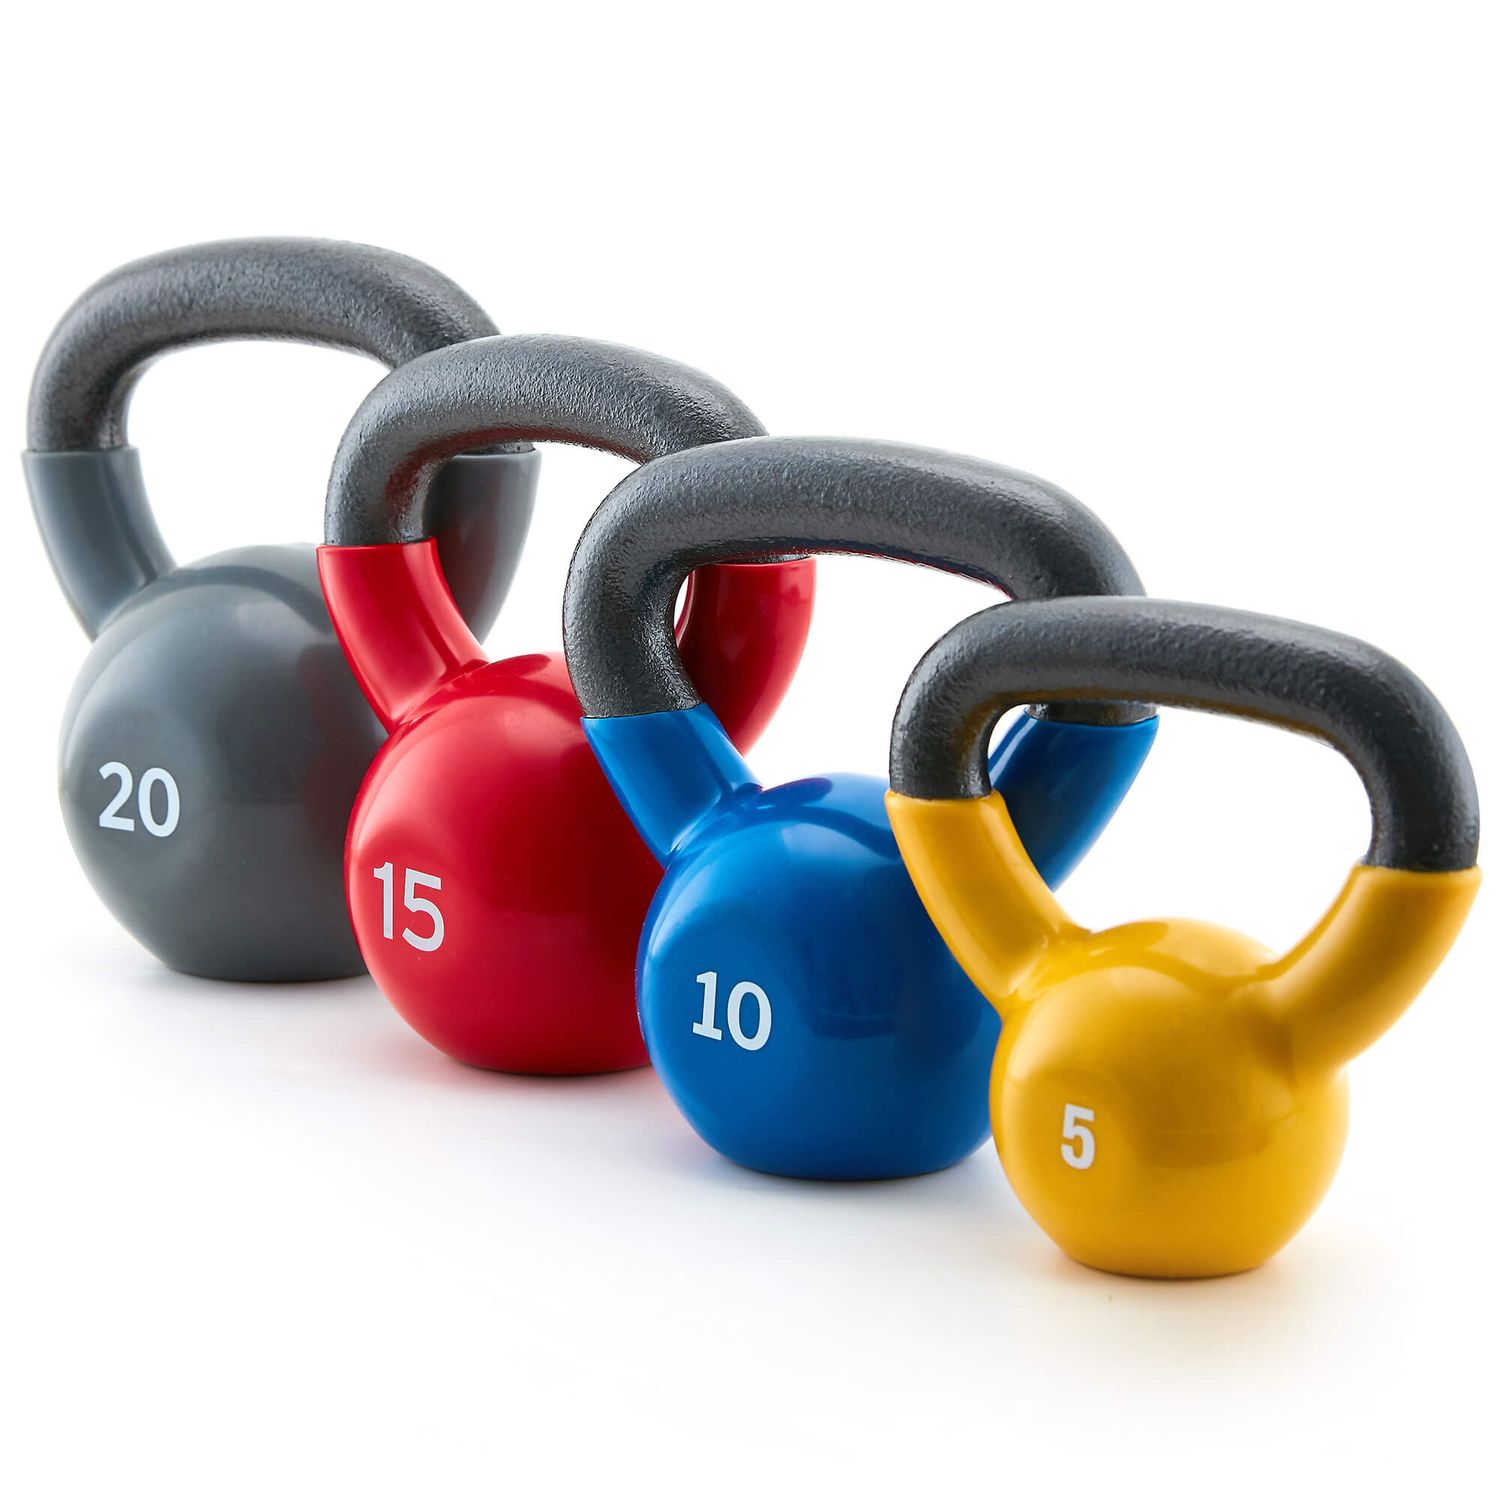 Best Gym Owner's Kettlebell Buying Guide In 2022